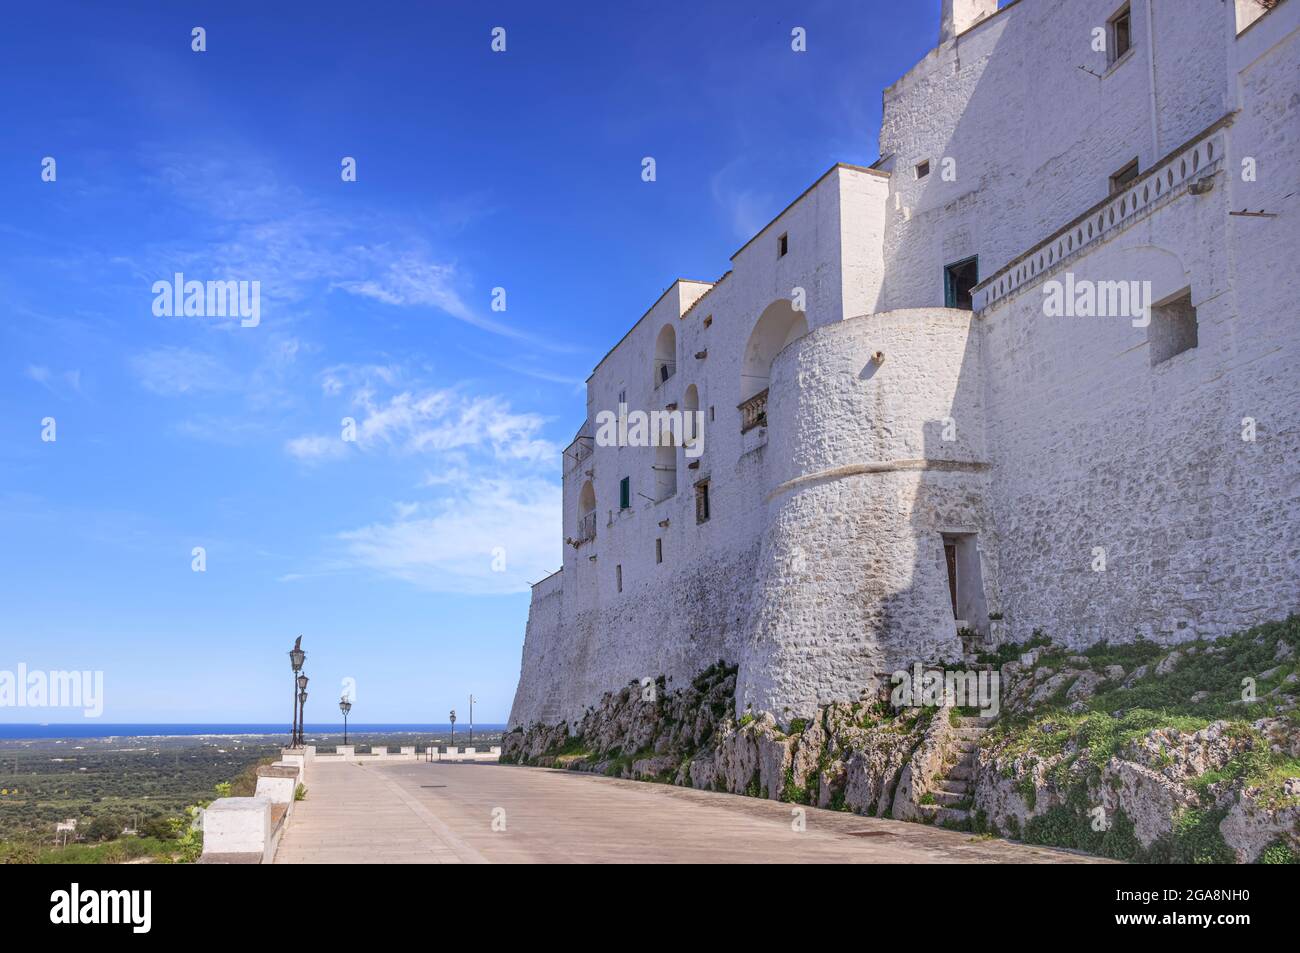 Ostuni, perched on three hills, is located inside the Itria Valley 8 km from the Adriatic coast of Apulia in southern Italy. Stock Photo